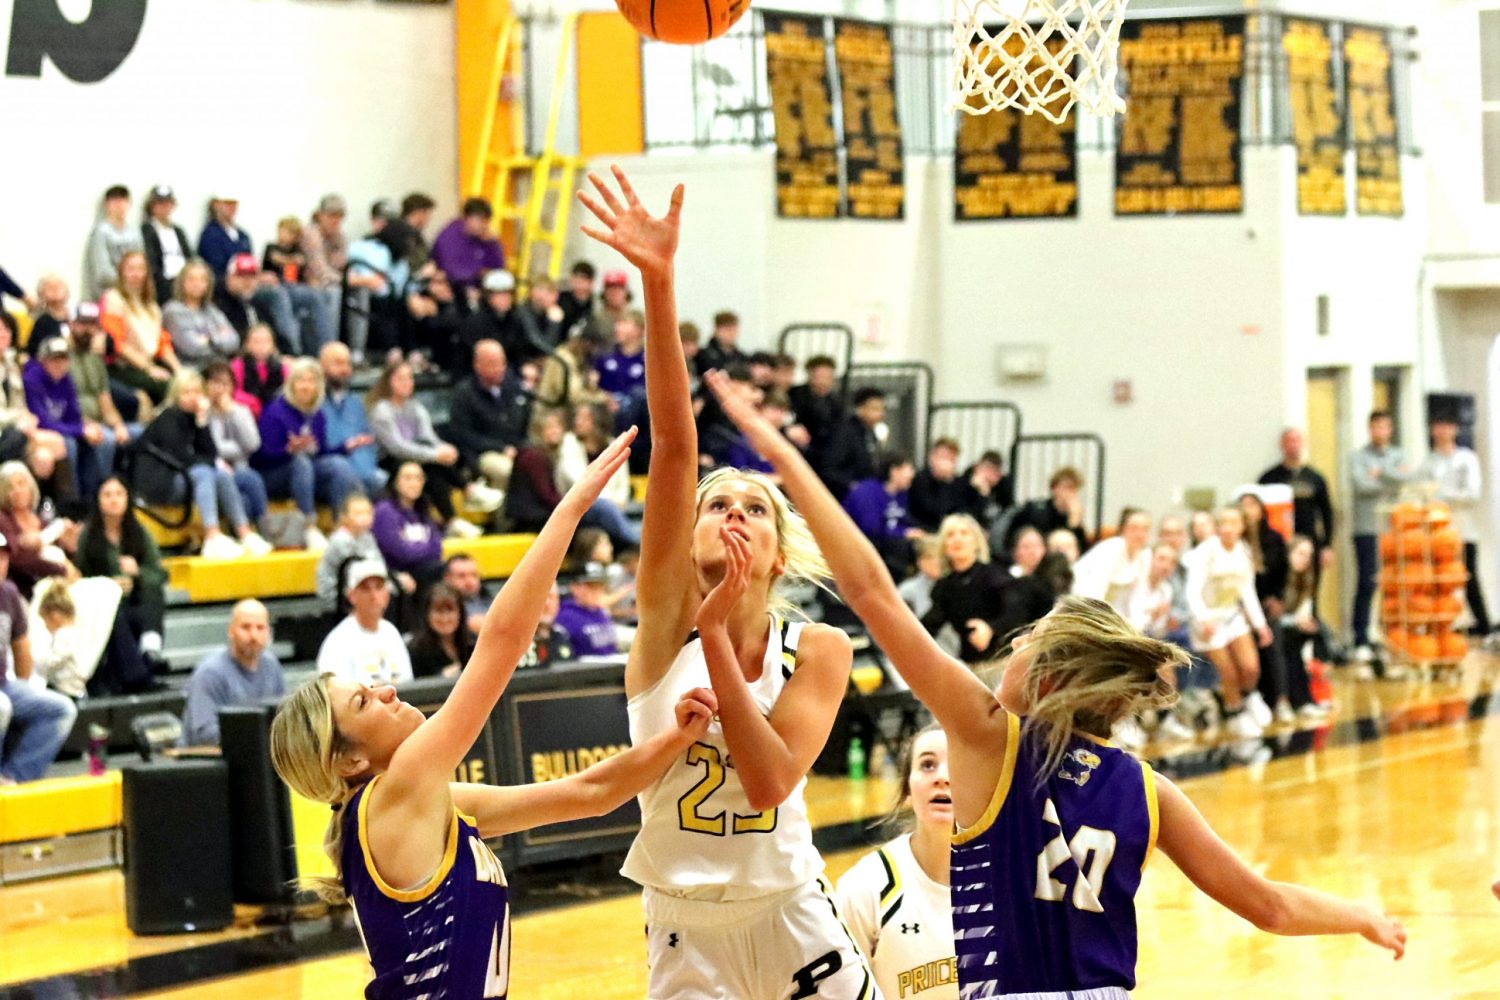 Abby Langlois shoots over a Danville defender in a game earlier this season. Enquirer photo by Jim Meadows